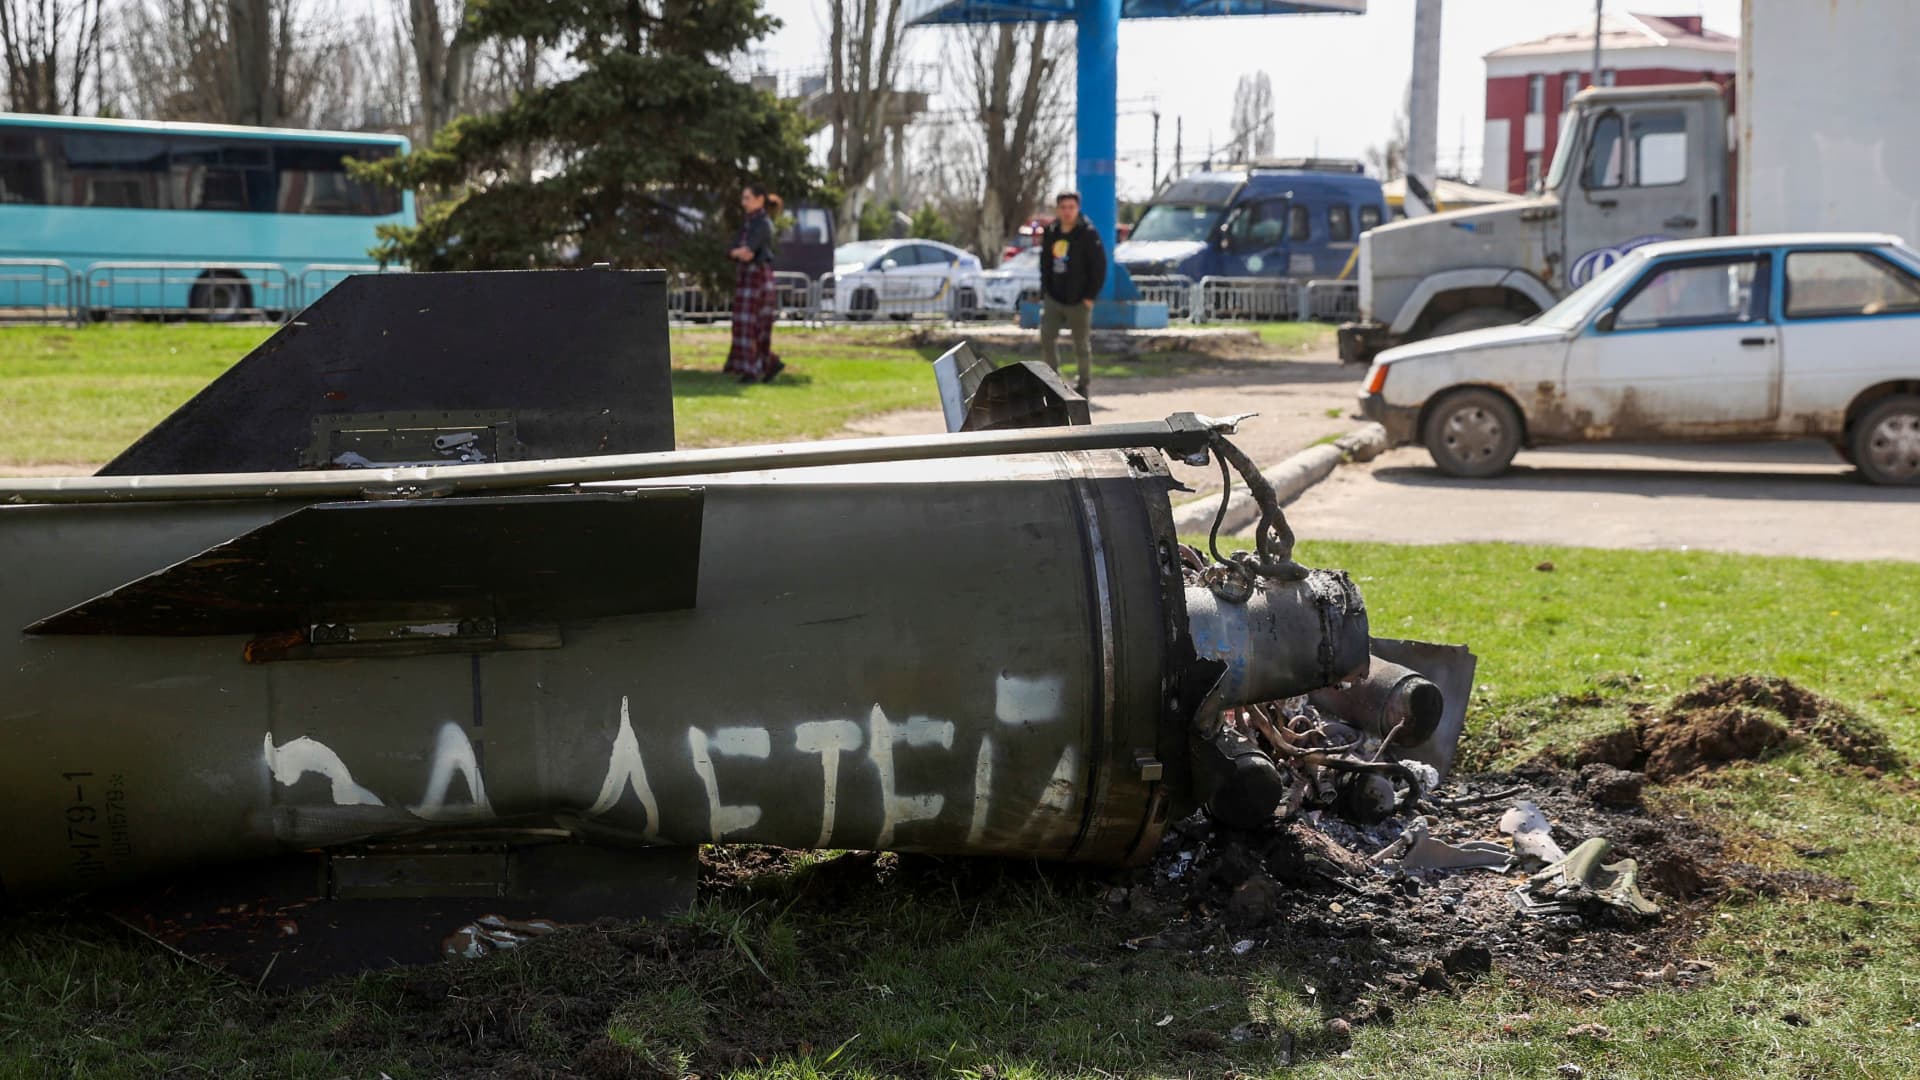 The remains of a Russian rocket, one of two to be launched at a railway station in Kramatorsk, eastern Ukraine, killing 30 and injuring 100 more.